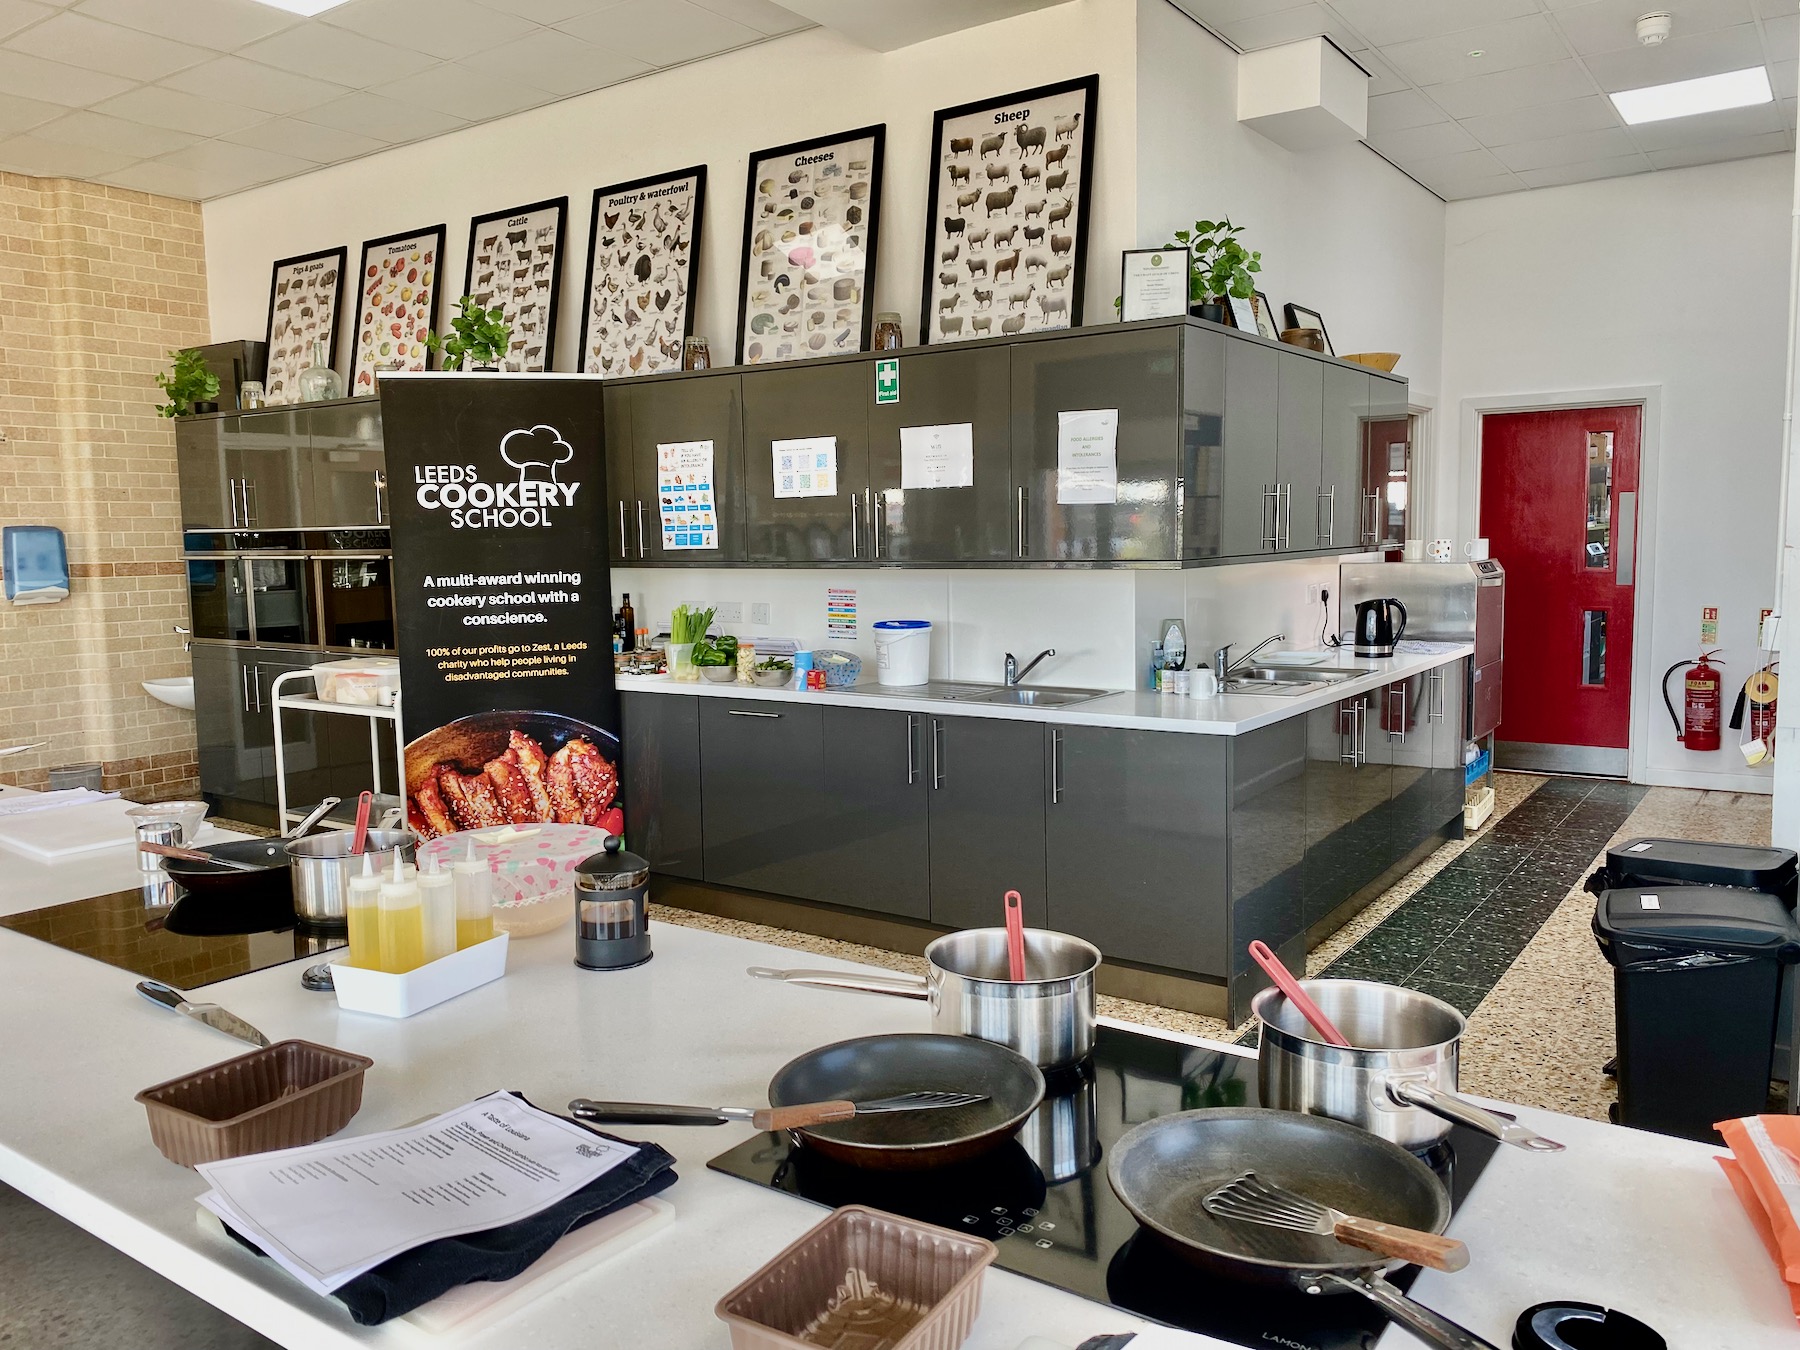 Leeds COOKERY SCHOOL ACCREDITED BY ICSA